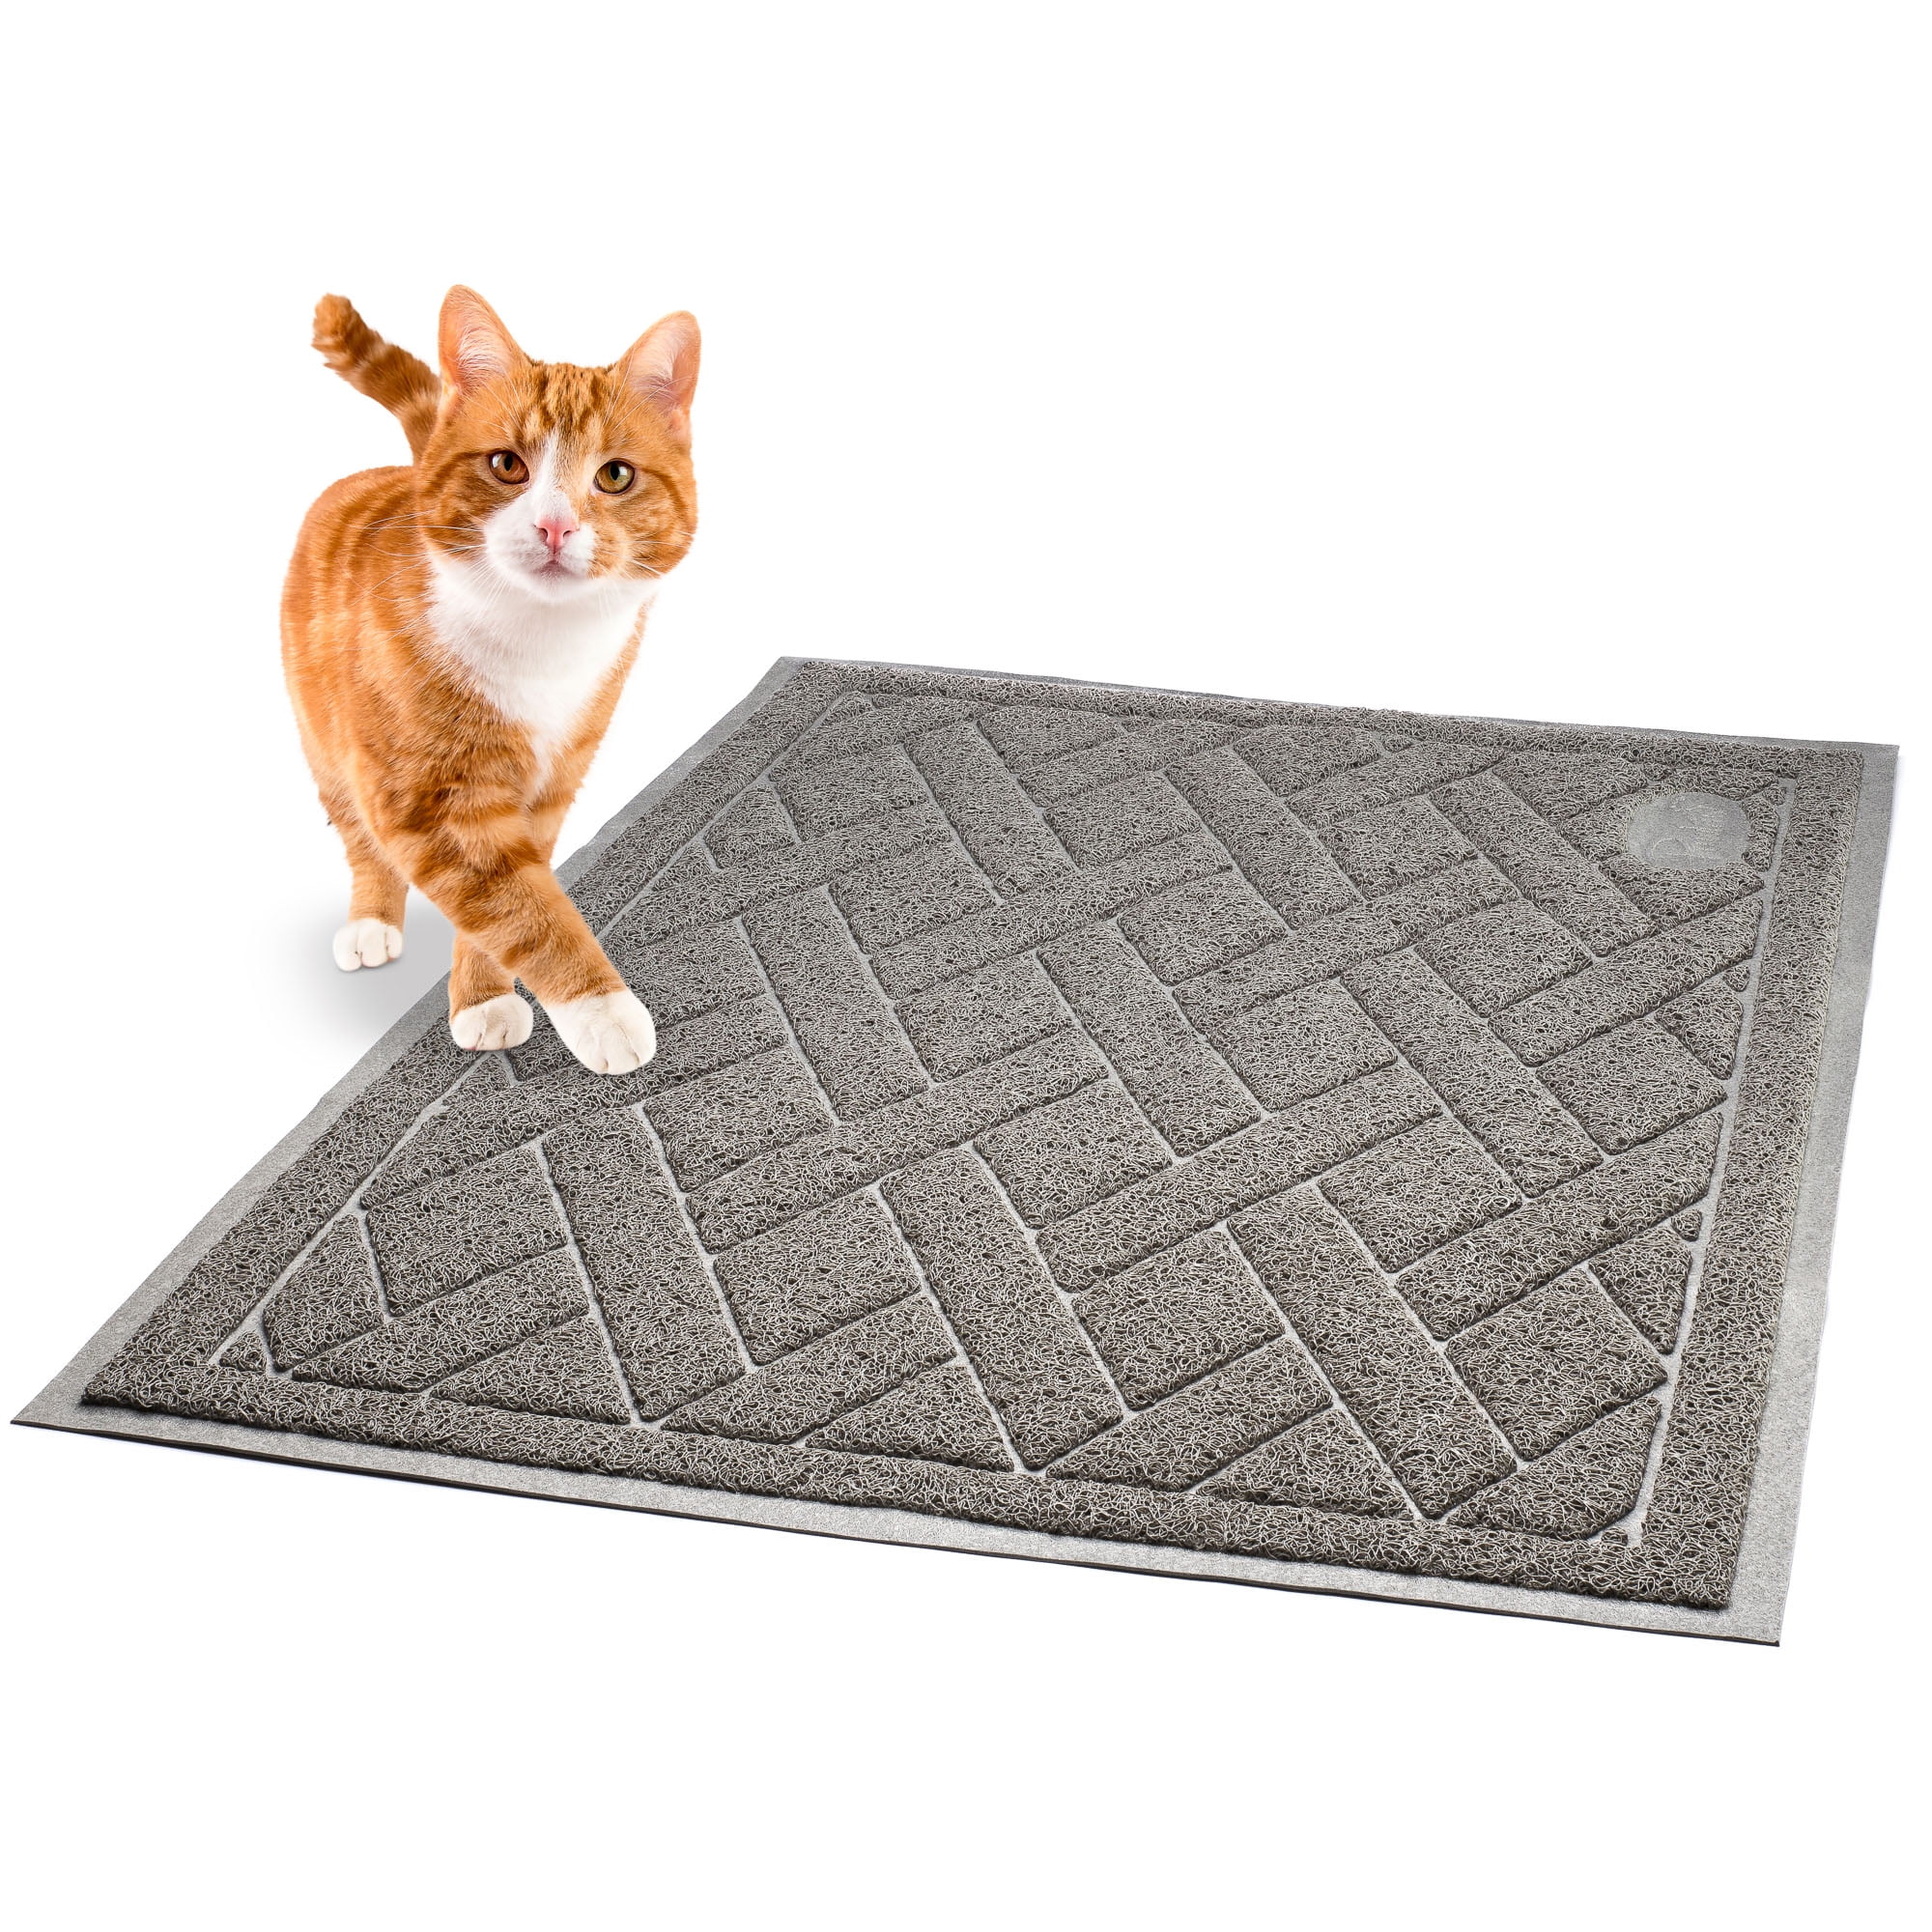 Jumbo XL Sizes 35 x23 inches Best Scatter Control Mat Traps Litter Phthalate Free MIGHTY MONKEY Premium Cat Litter Trapping Mats Soft on Kitty Paws Purple Easy to Clean